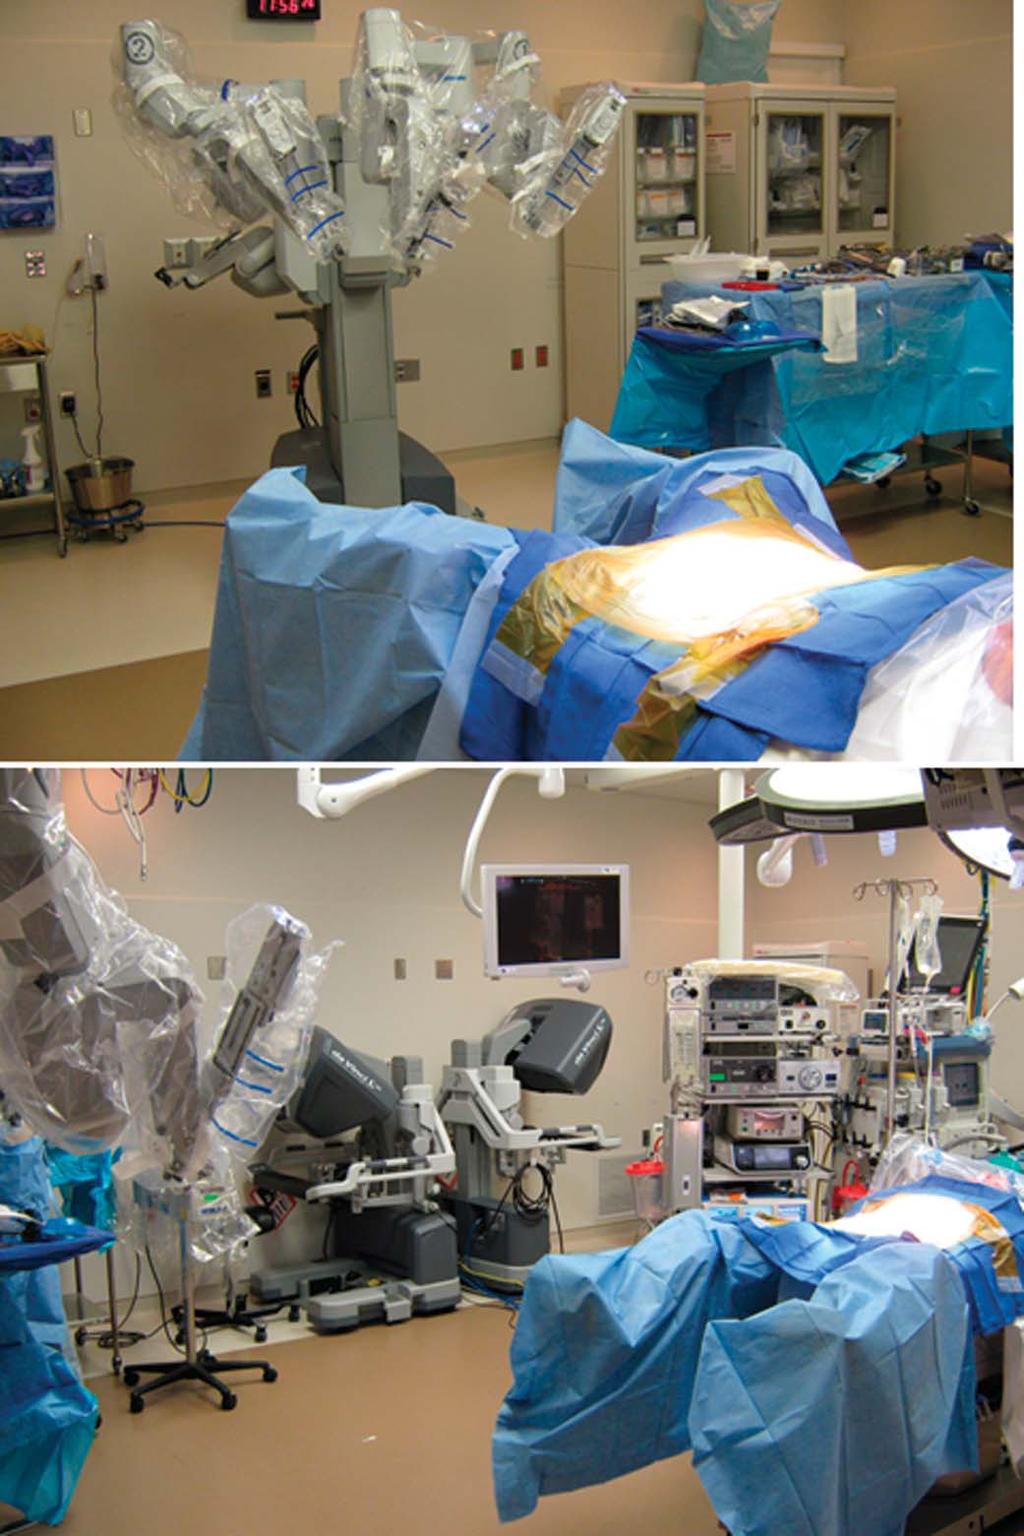 Holder-Murray et al Inflamm Bowel Dis Volume 21, Number 6, June 2015 FIGURE 6. Robotic assisted laparoscopic surgery. Top panel: robot awaiting docking in lithotomy position.